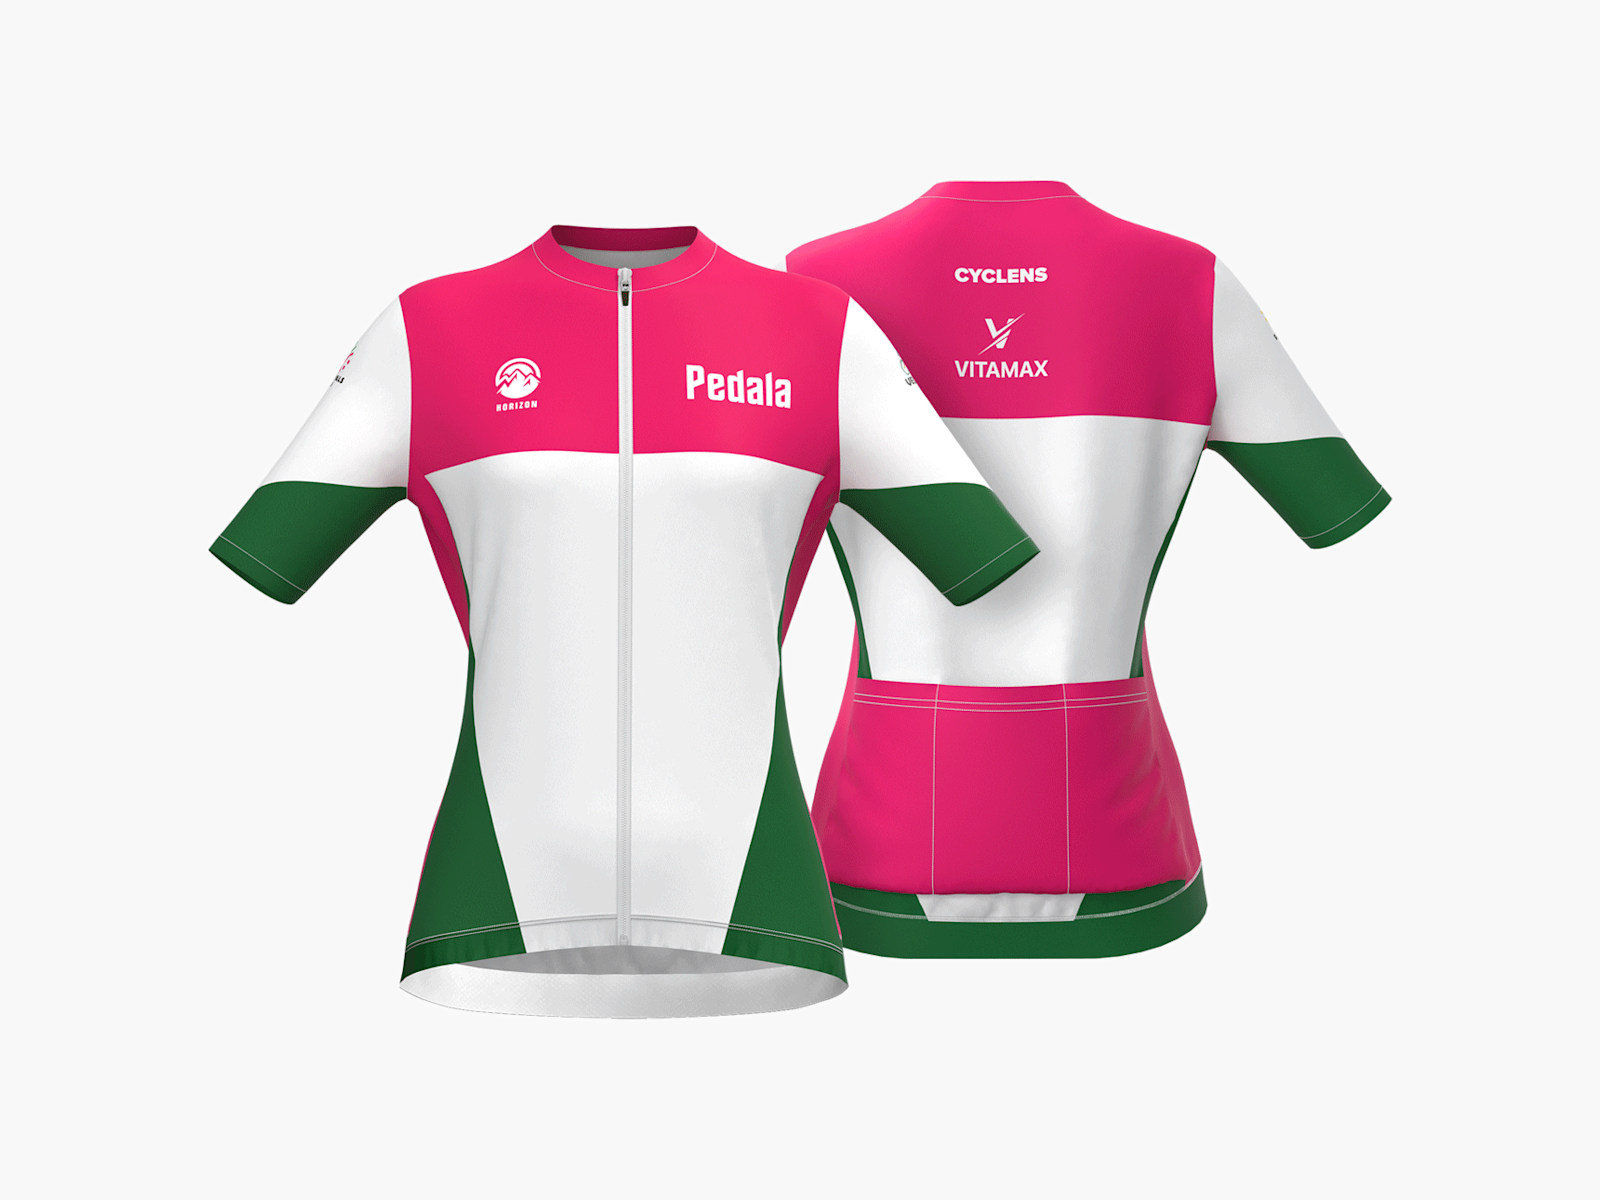 A front and back mannequin shots of a full custom women’s cycling jersey that features the pedala cycling brand and multiple sponsors for a sunglasses cycling and nutri products brands.